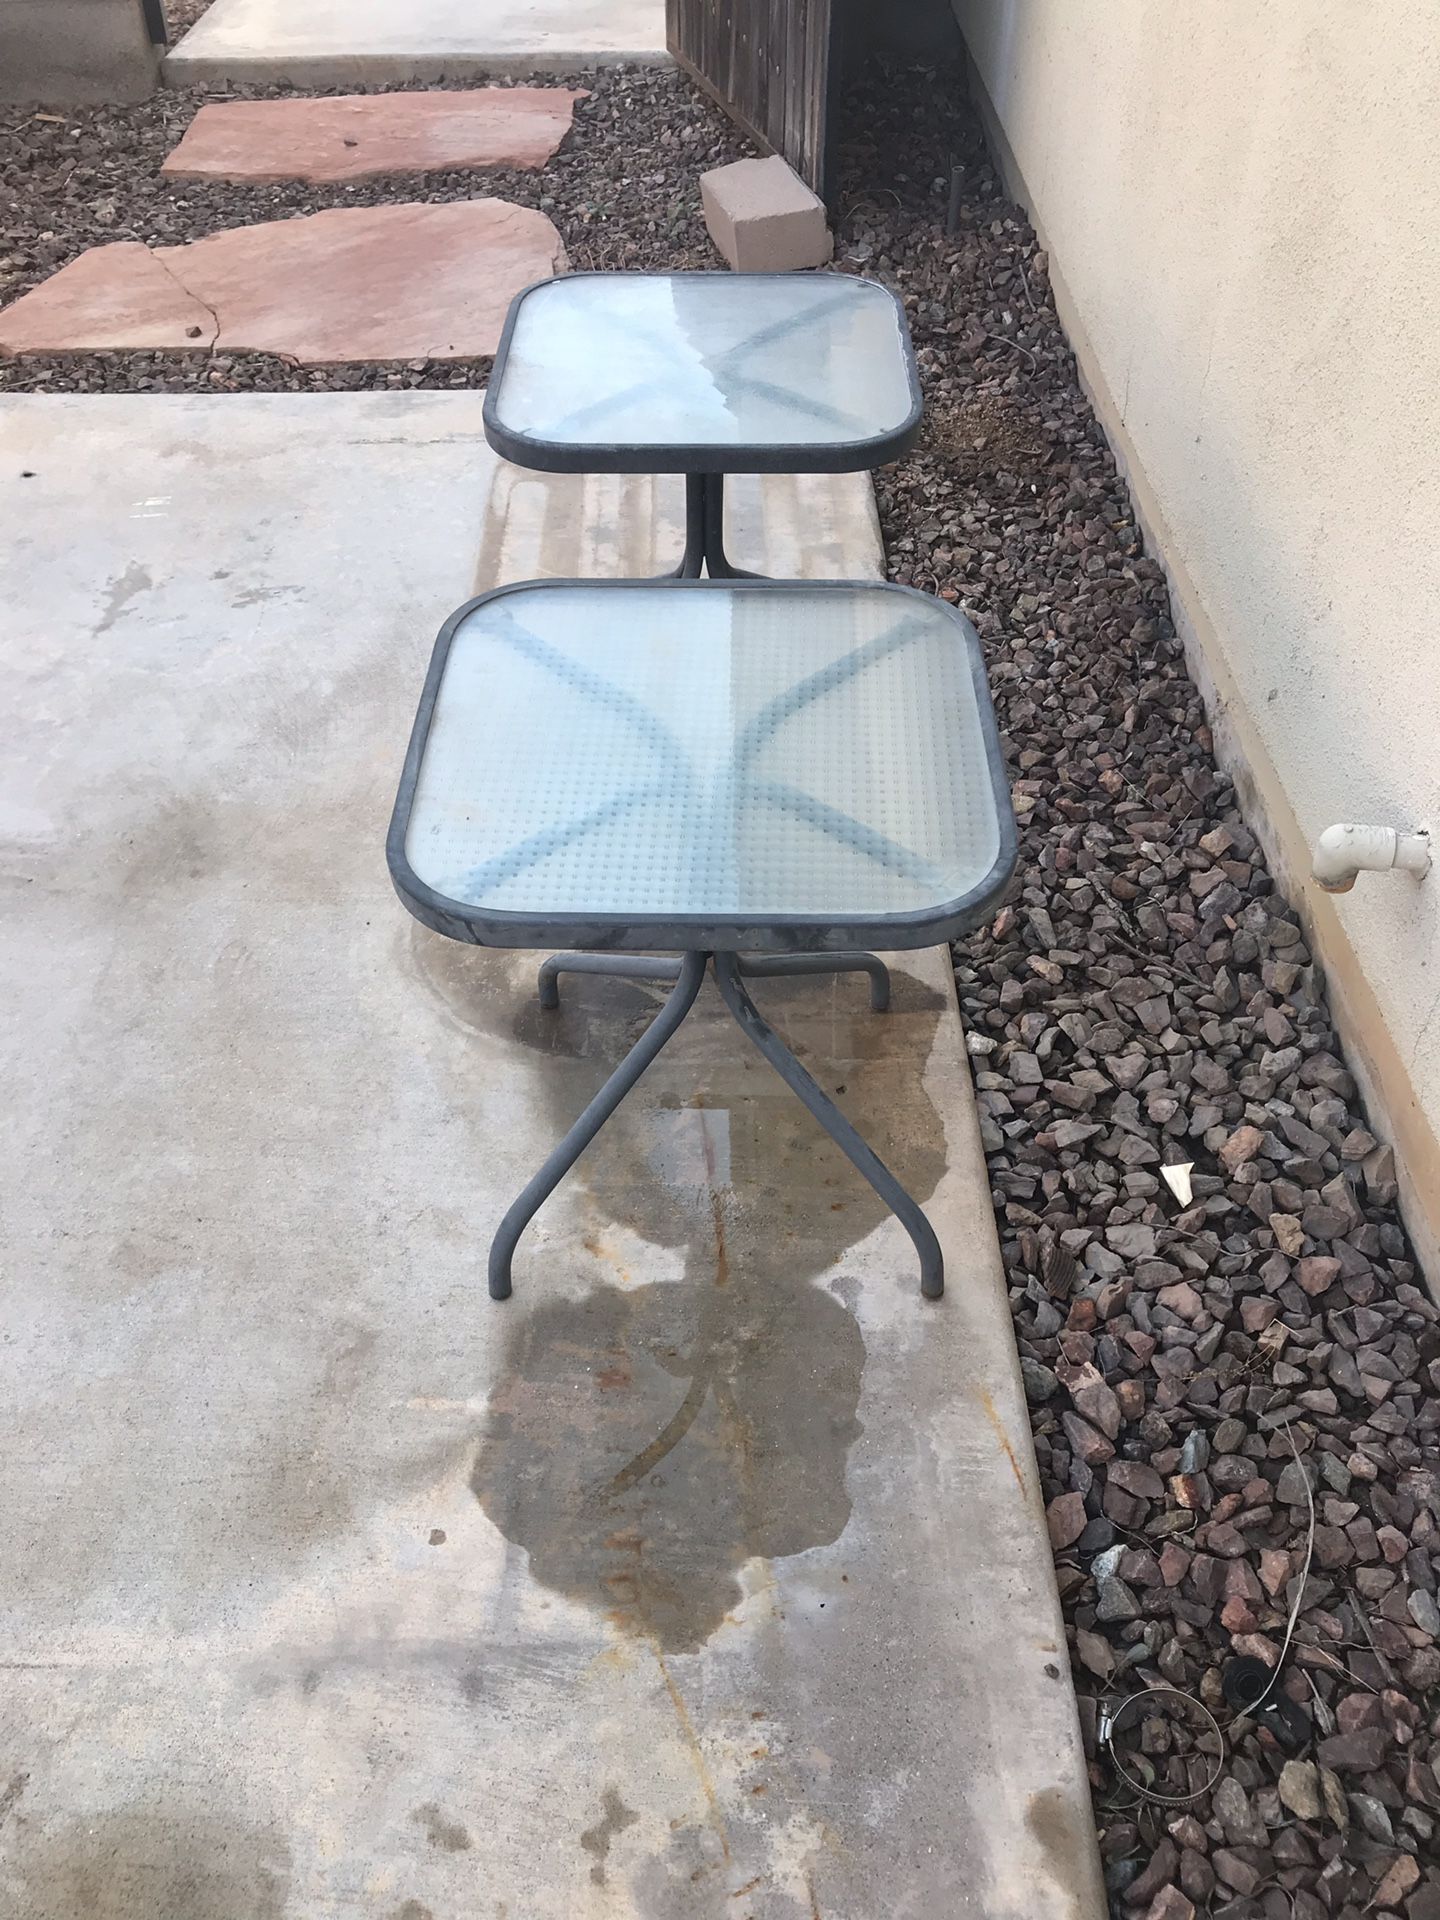 2 - 16” glass top pool lounge chair side tables. Metal base. Selling as set.